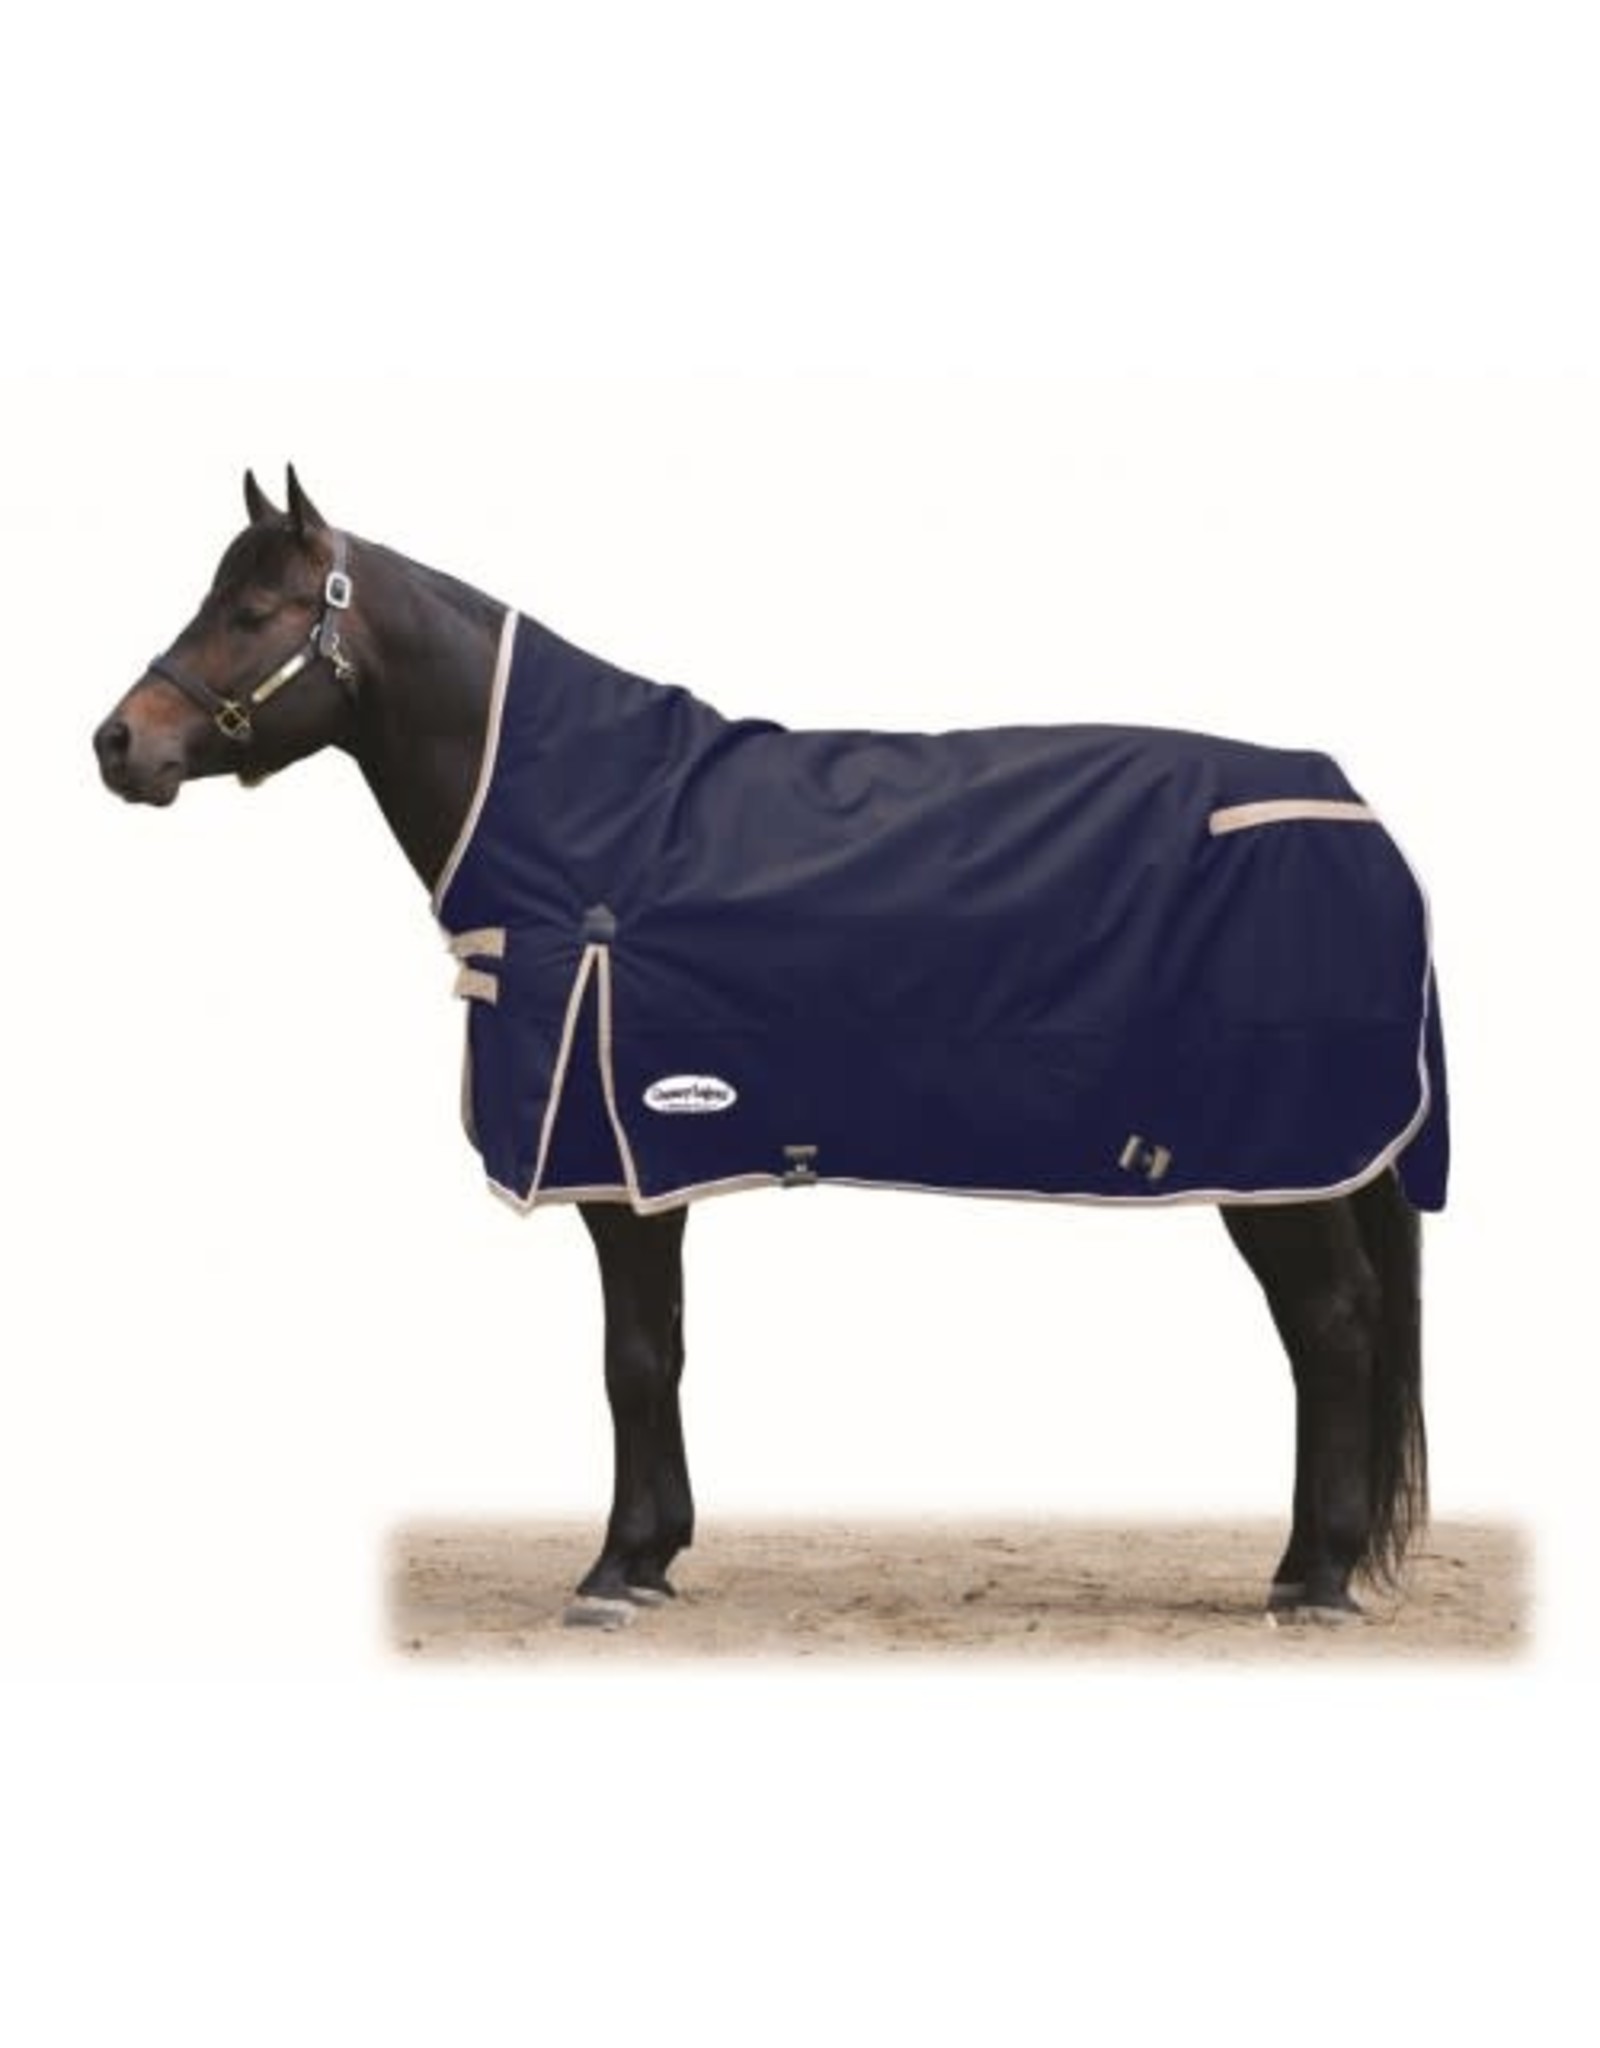 Country Legend BLANKET* Country Legend Turnout half neck Navy 280g 74" - 317577-74